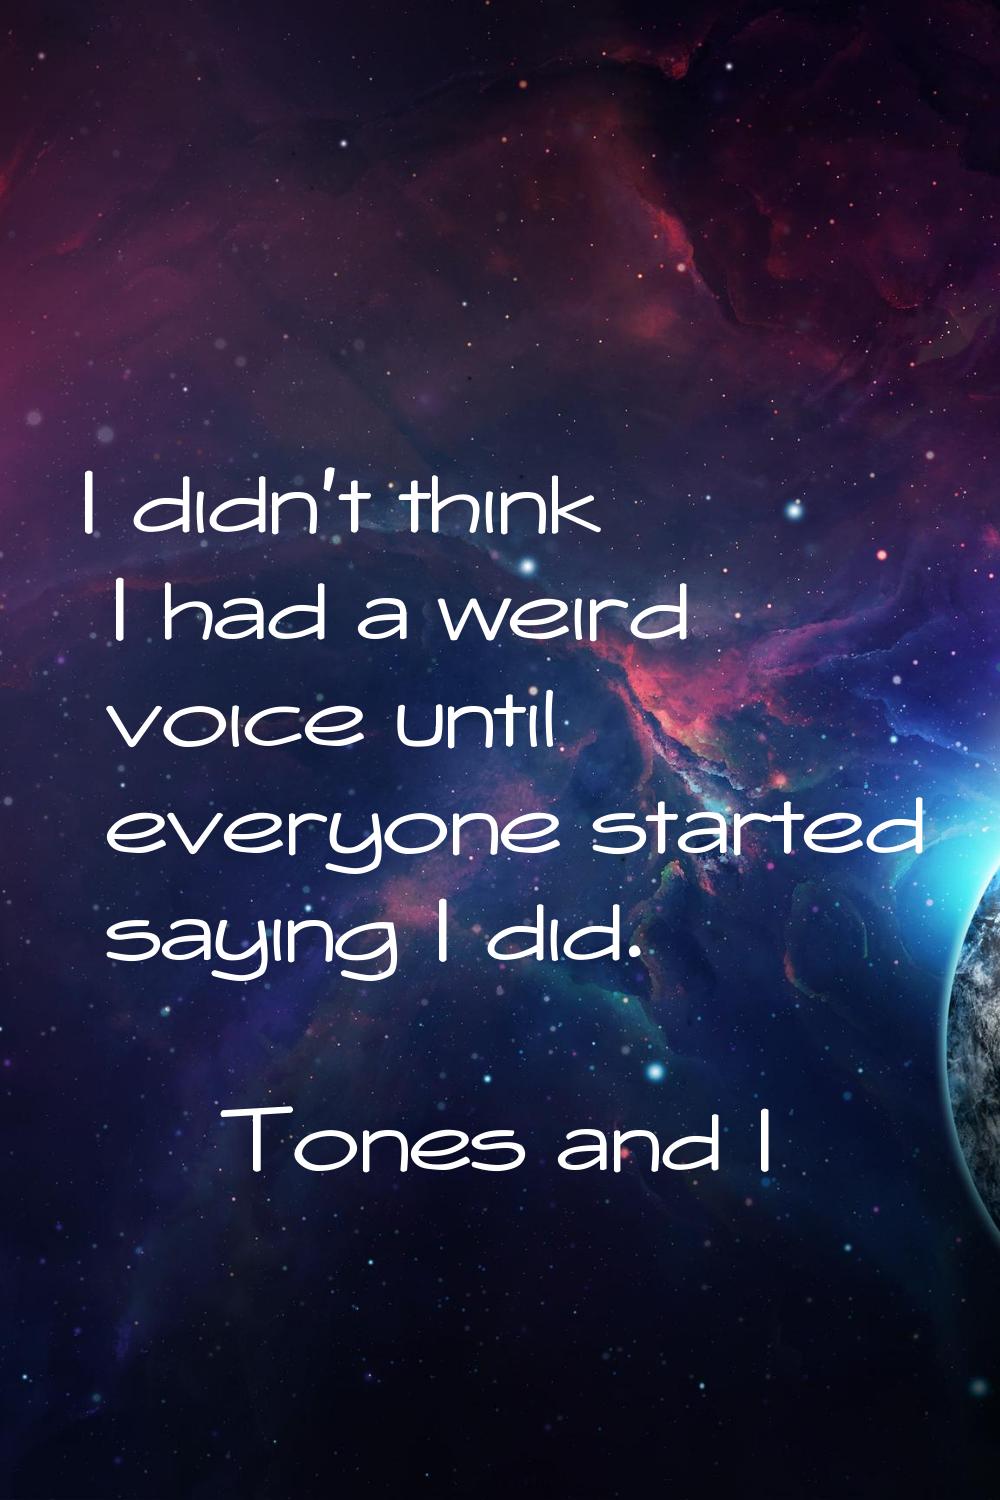 I didn't think I had a weird voice until everyone started saying I did.